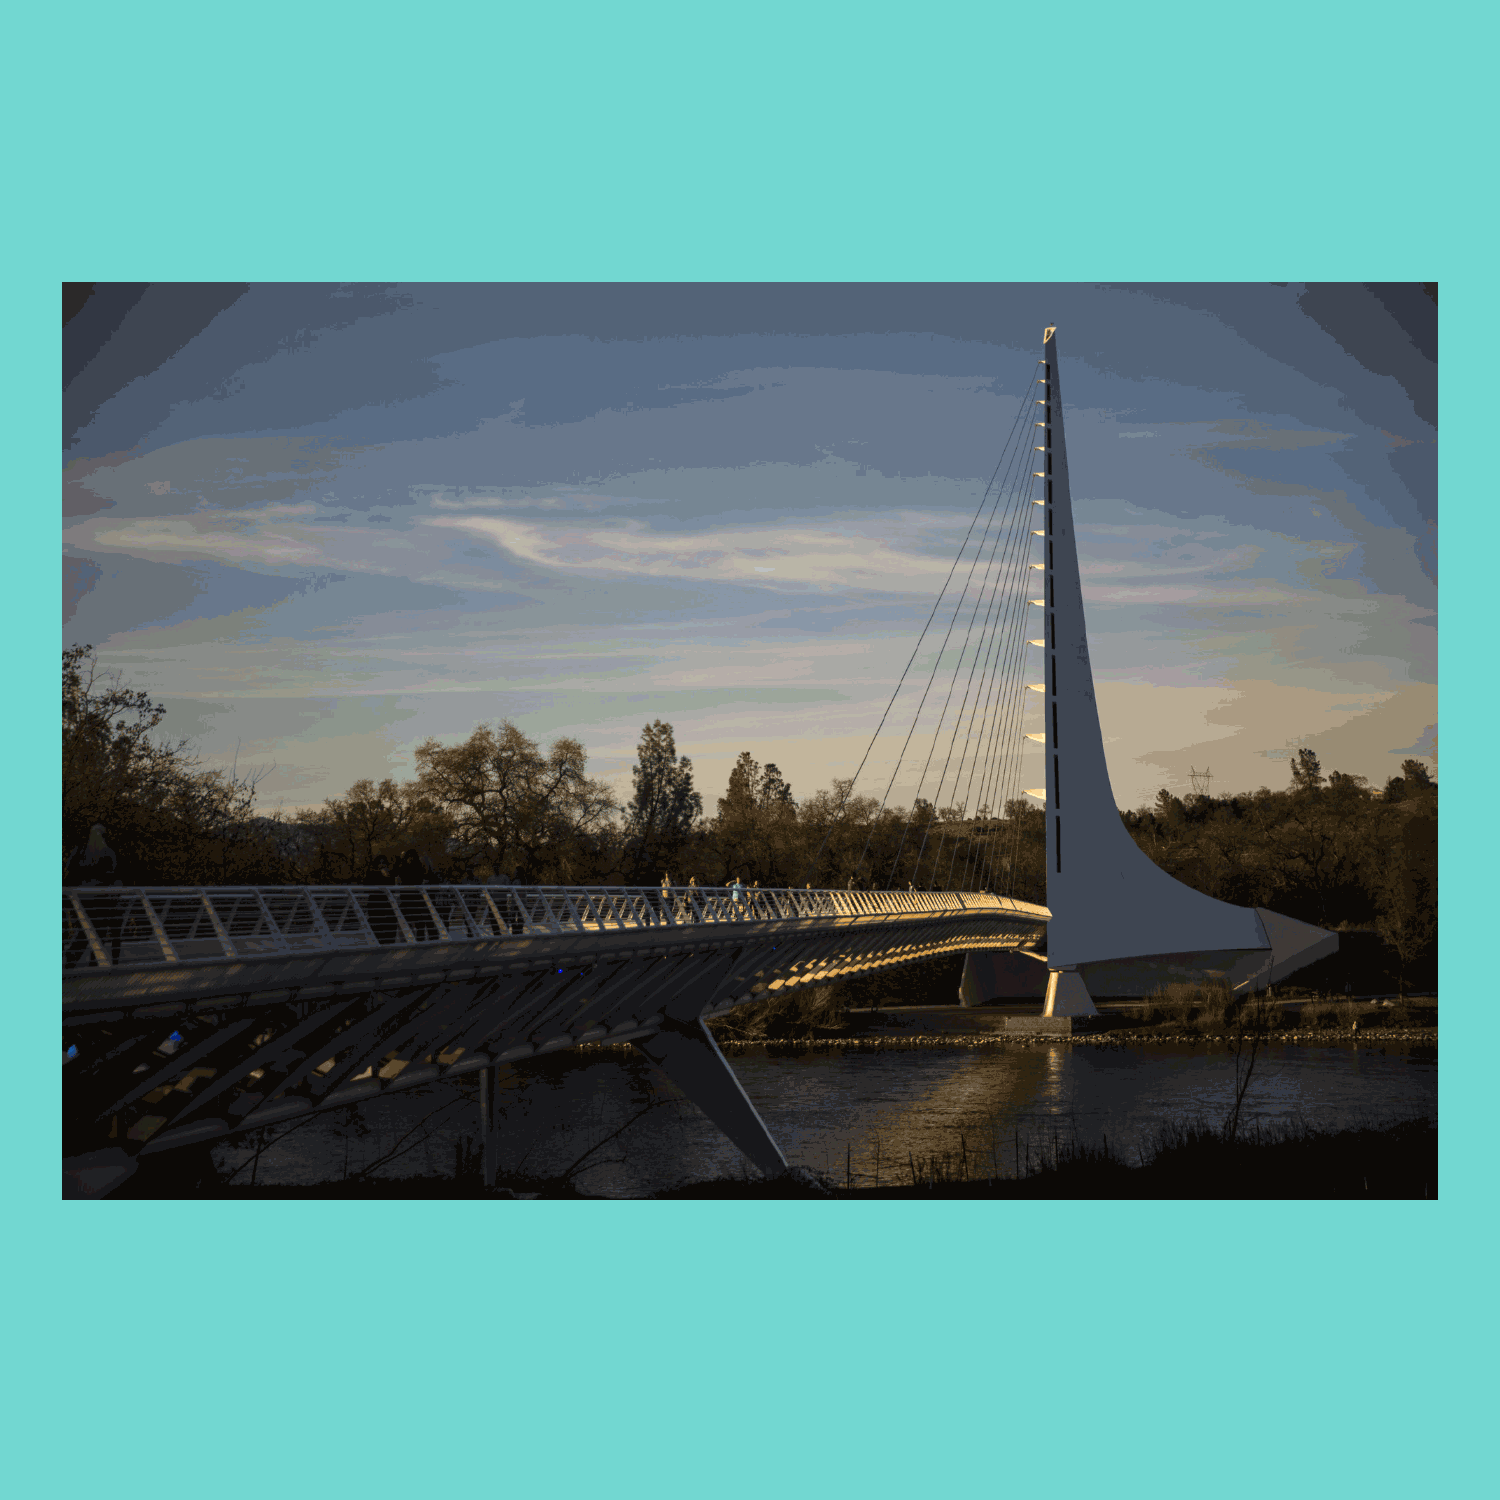 Photo of Sundial Bridge at Turtle Bay in Redding and Joan Schipper's photos from below.